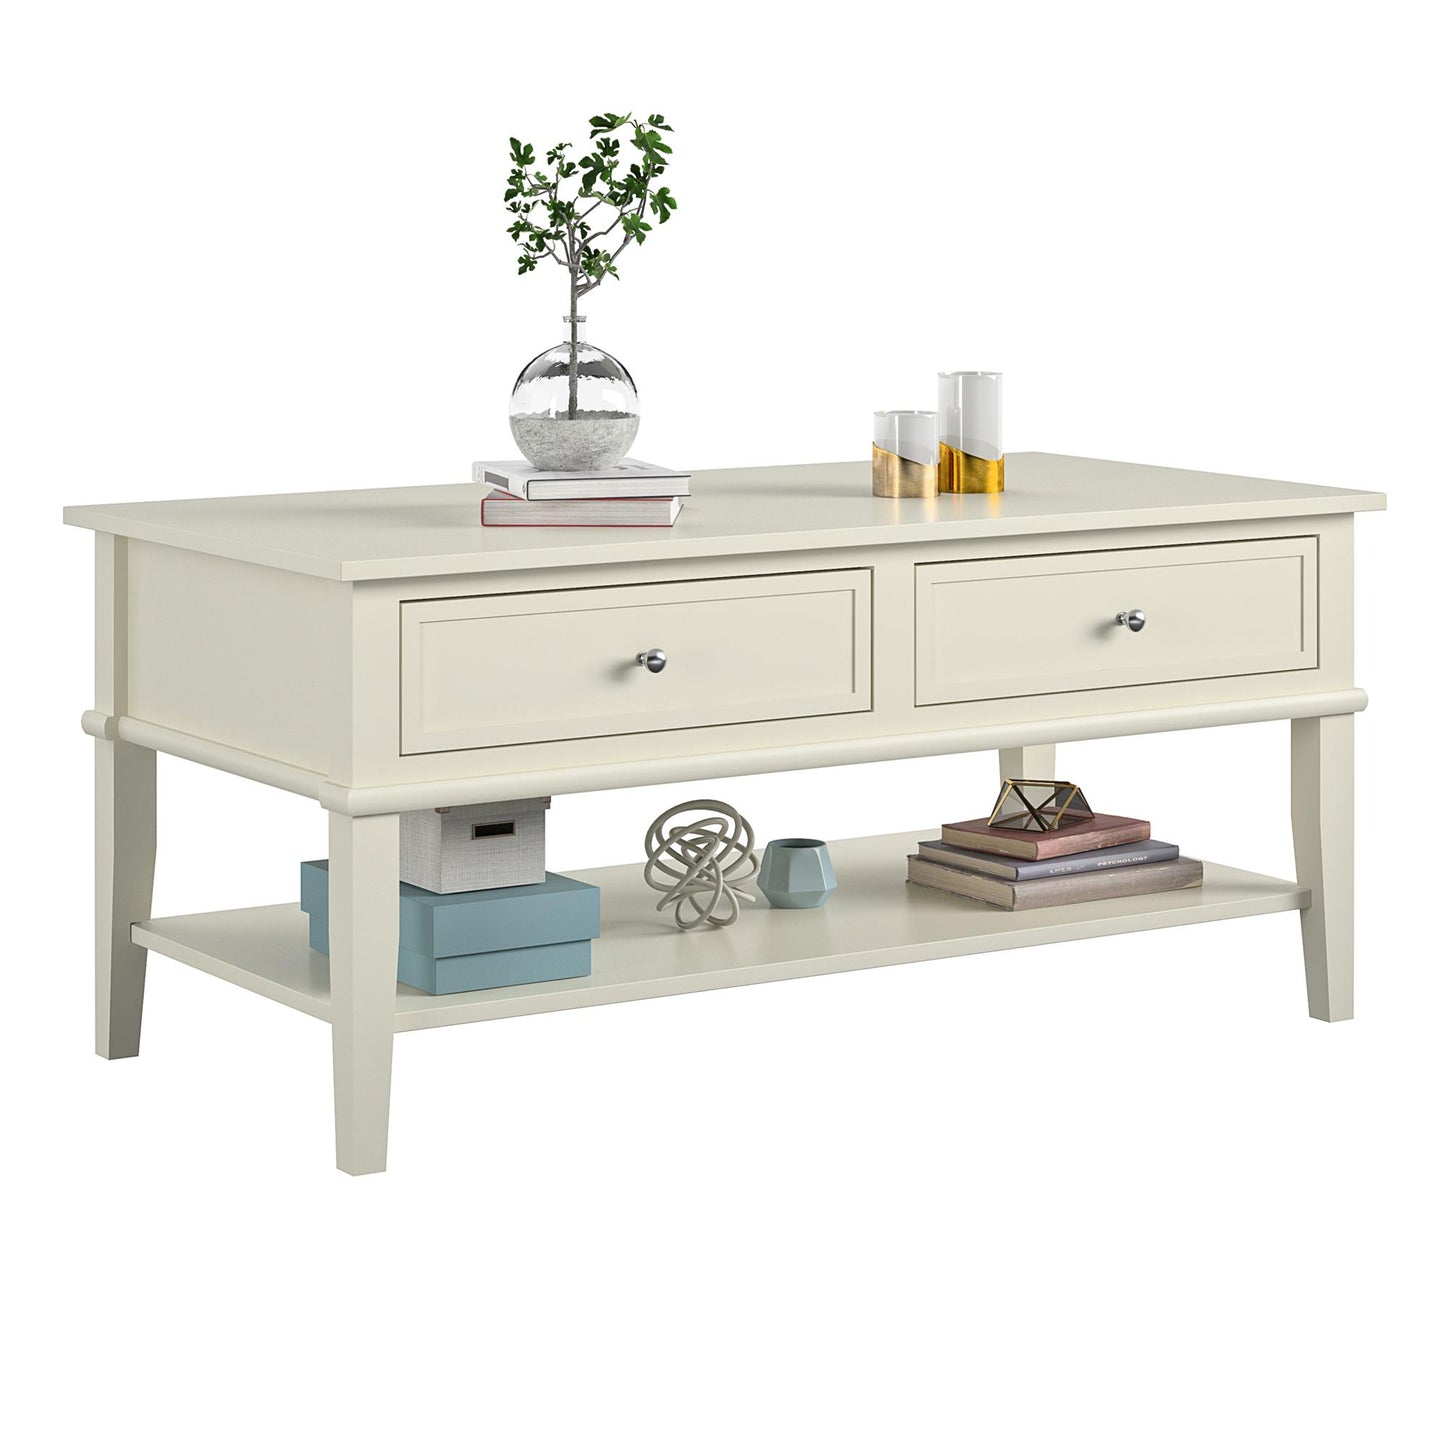 Franklin Coffee Table with 2 Drawers and Shelf - White